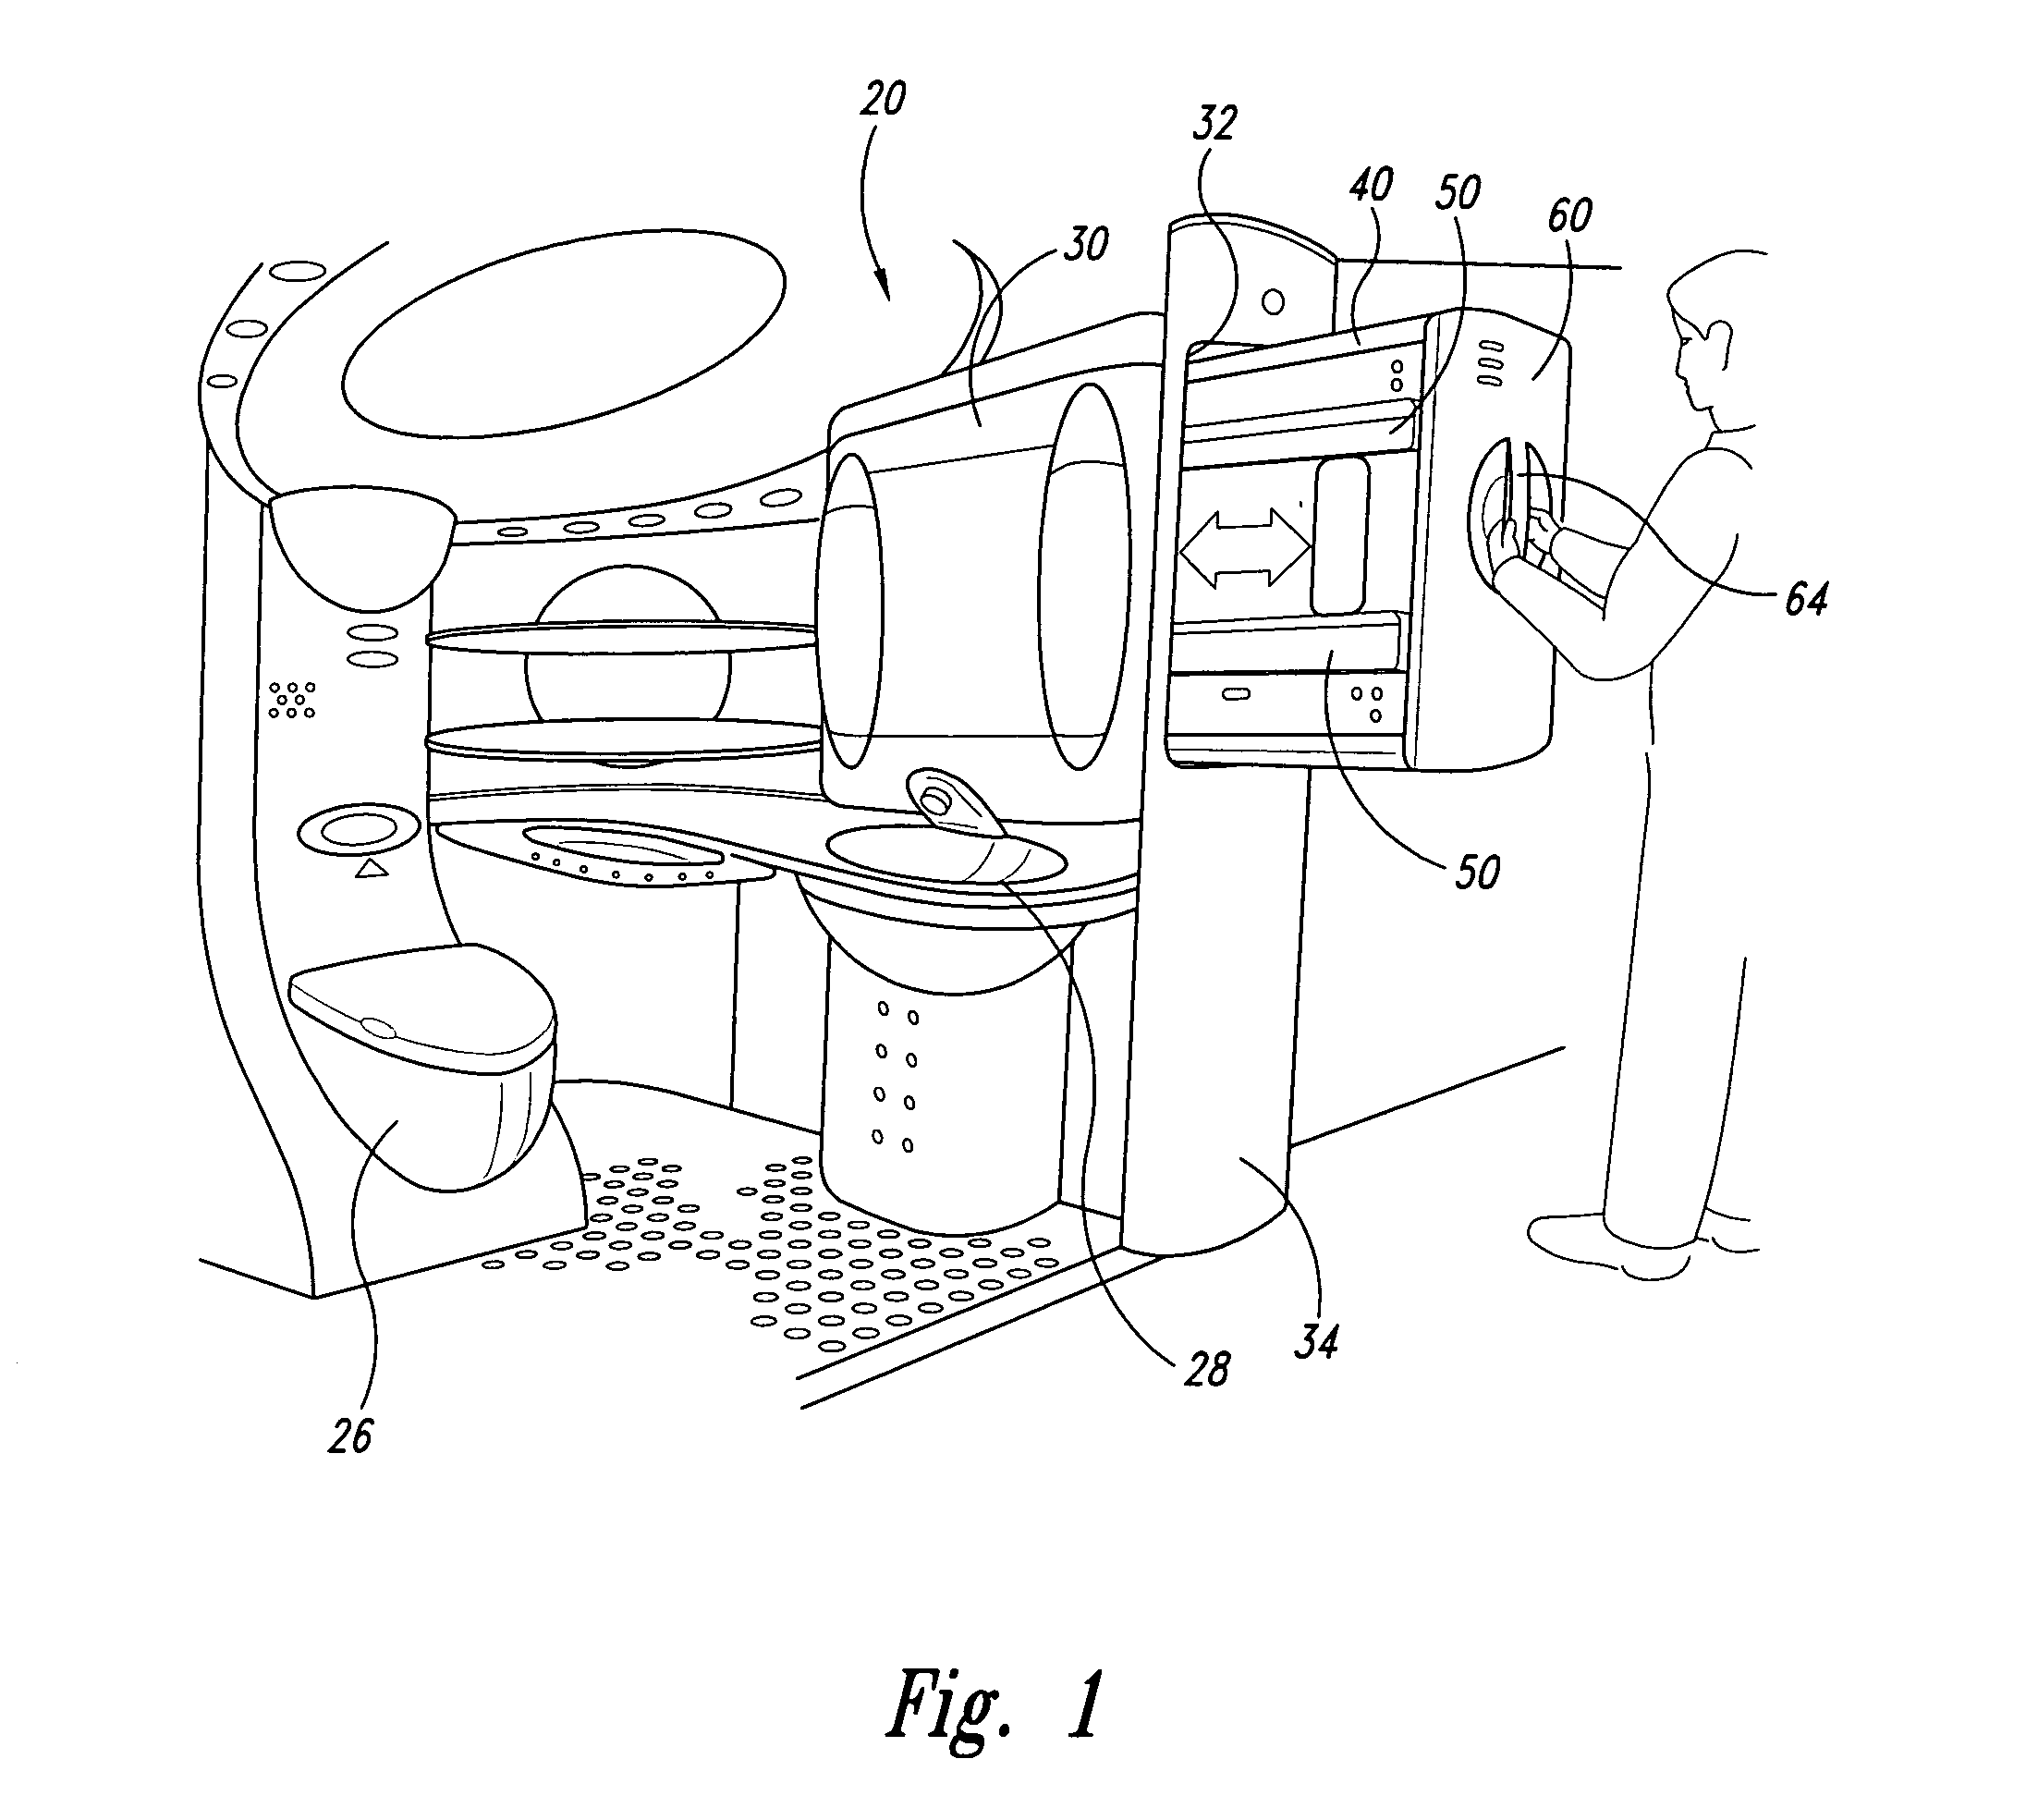 Lavatory fast pack system and method